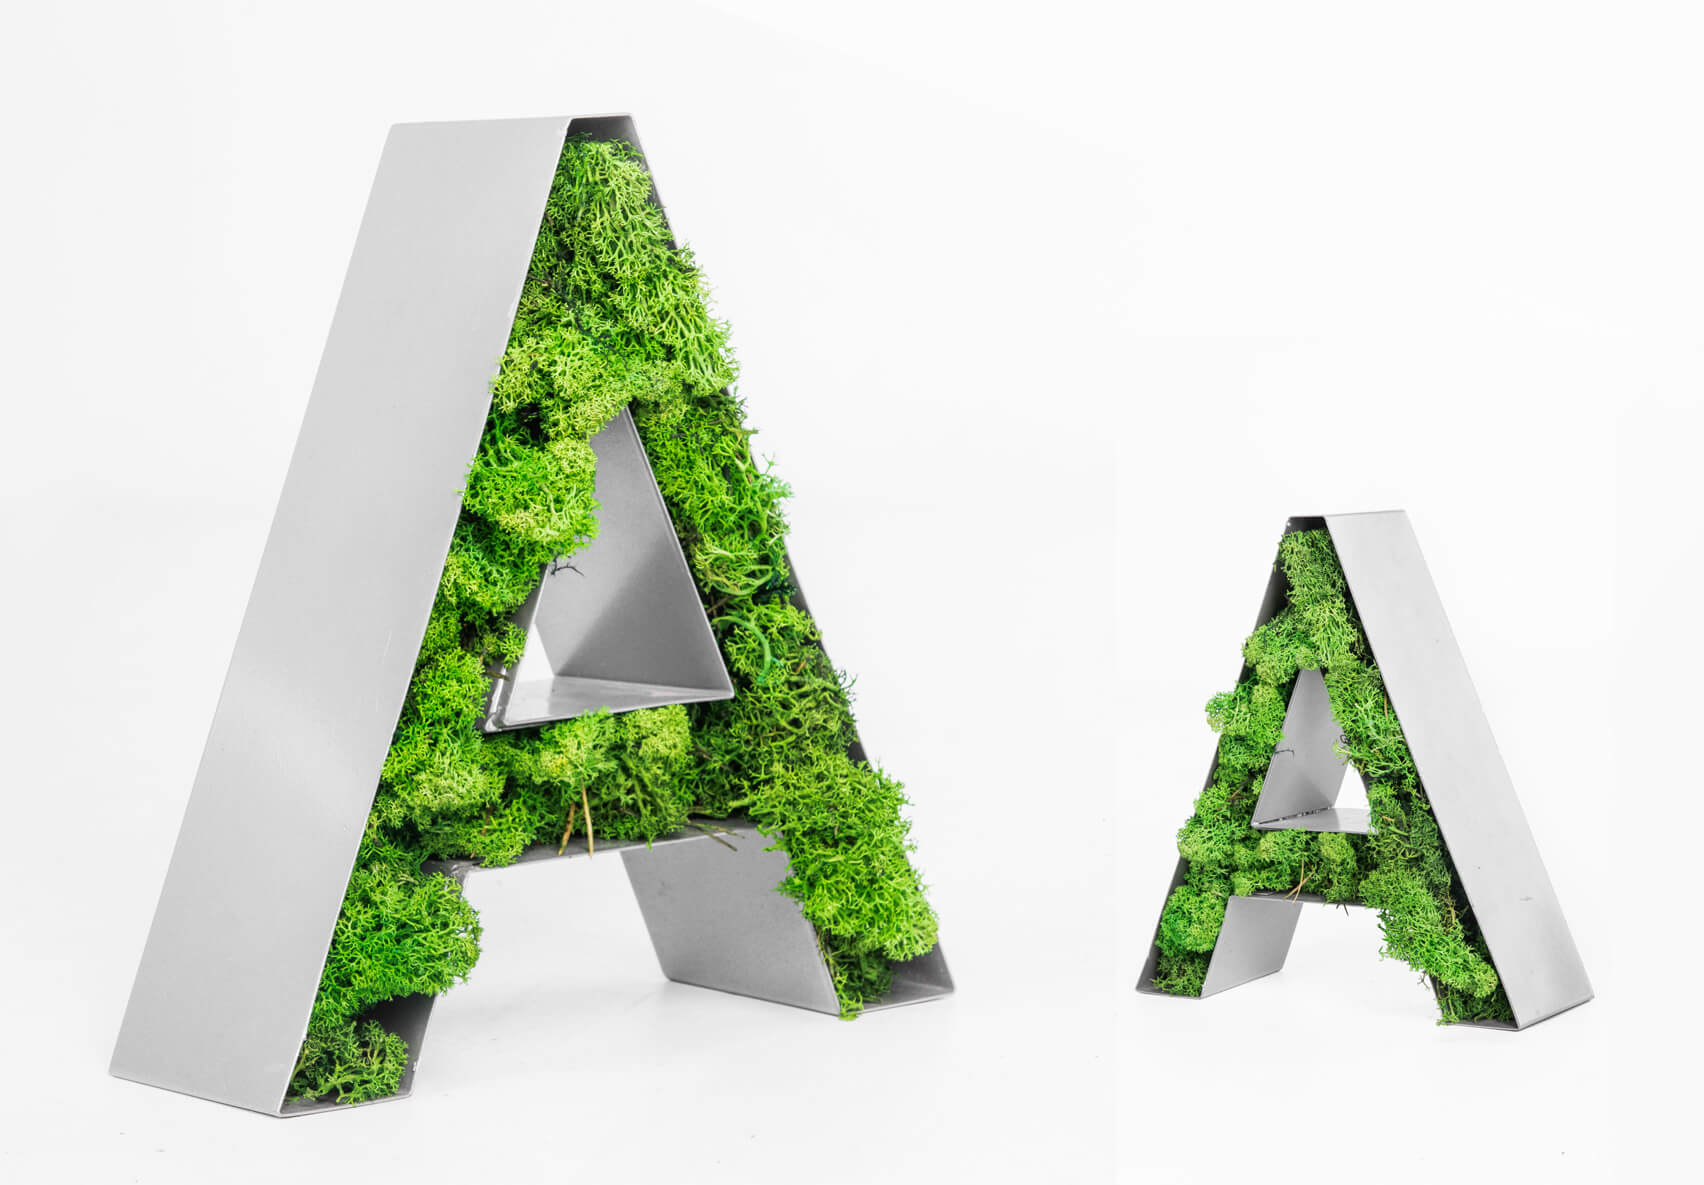 and decorative letters with moss moss - letters_with_mchem_letters_mech_letters_3d_with_mech_letters_with_mchu_mech_in_letters_letters_with_mch_logo_with_mchu_letters_with_mch_mech_in_logos